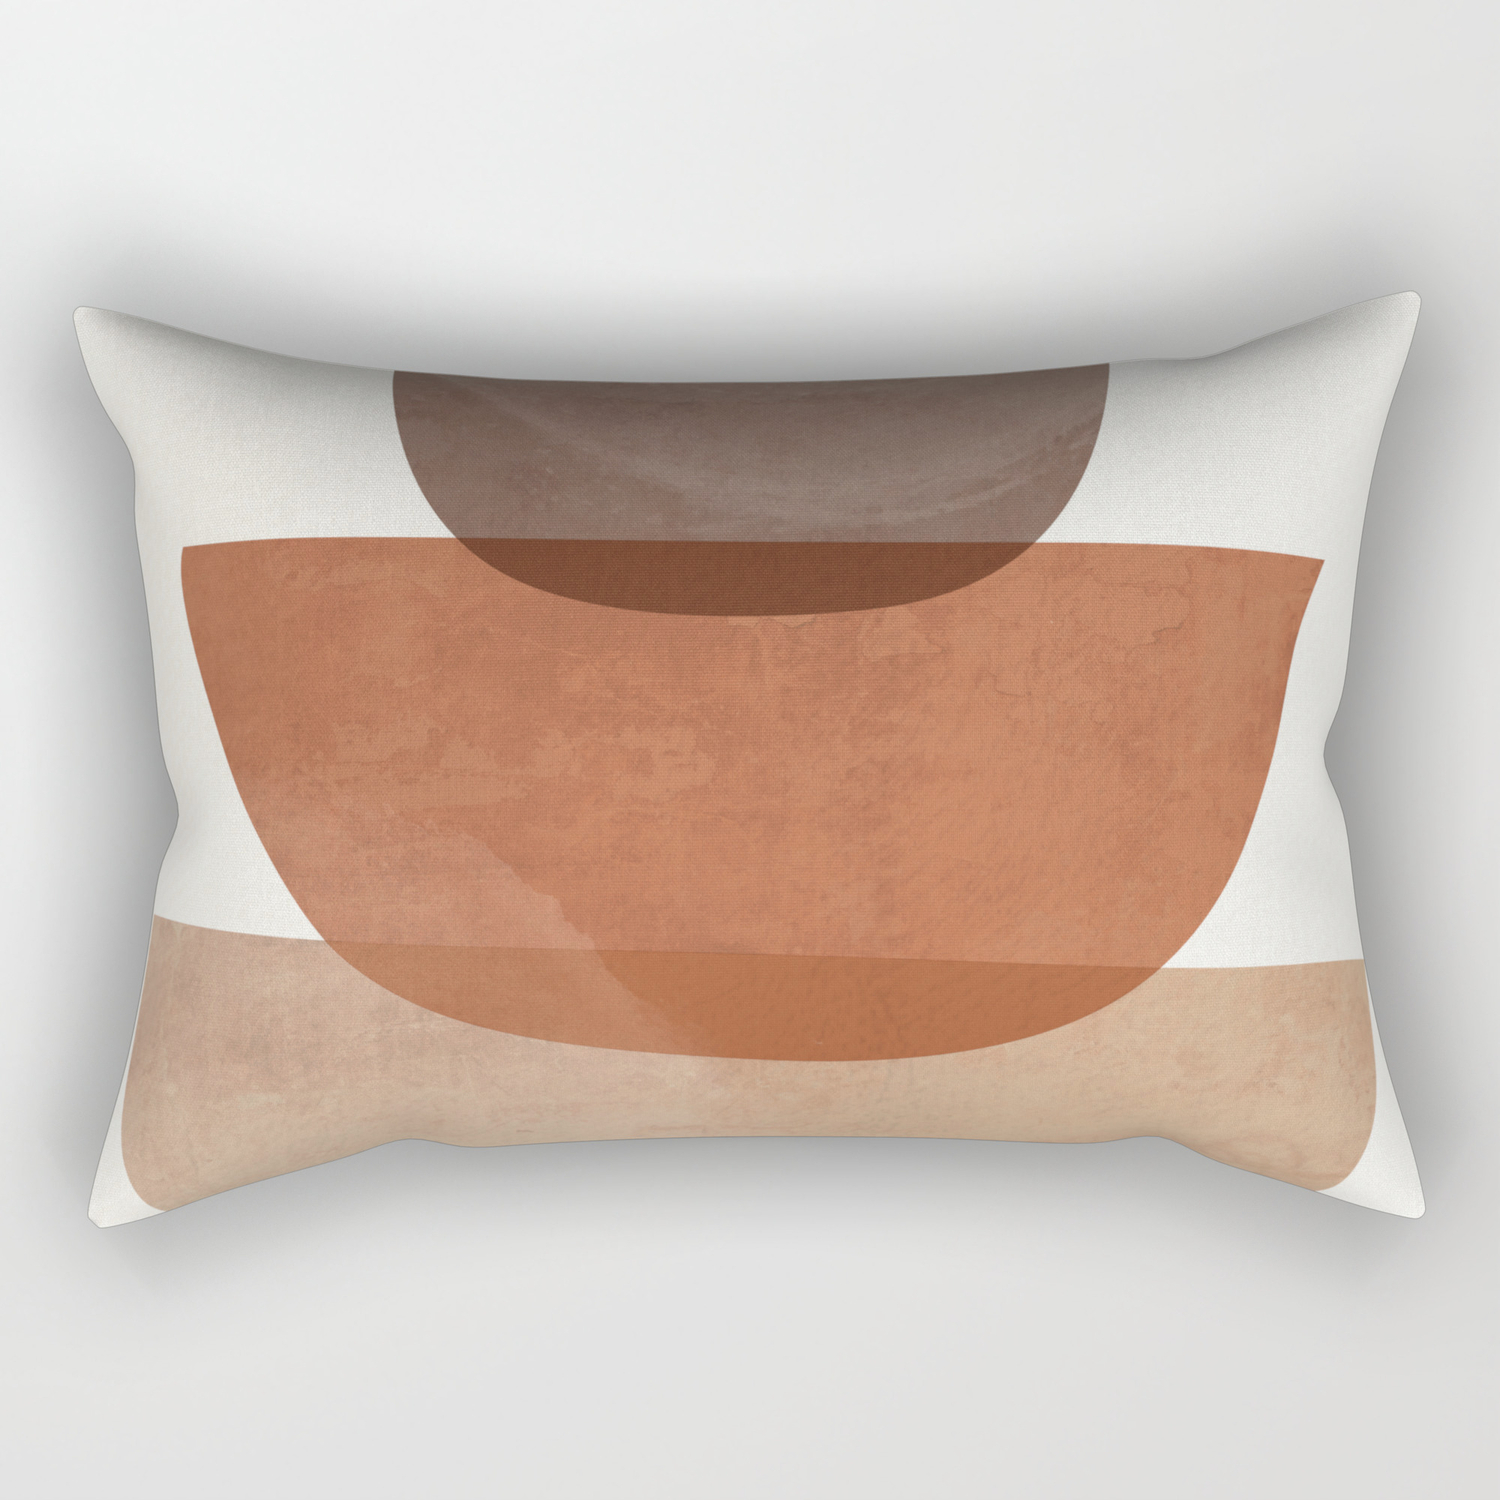 Large 25.5 x 18 Abstract Shapes by Aledan on Rectangular Pillow 